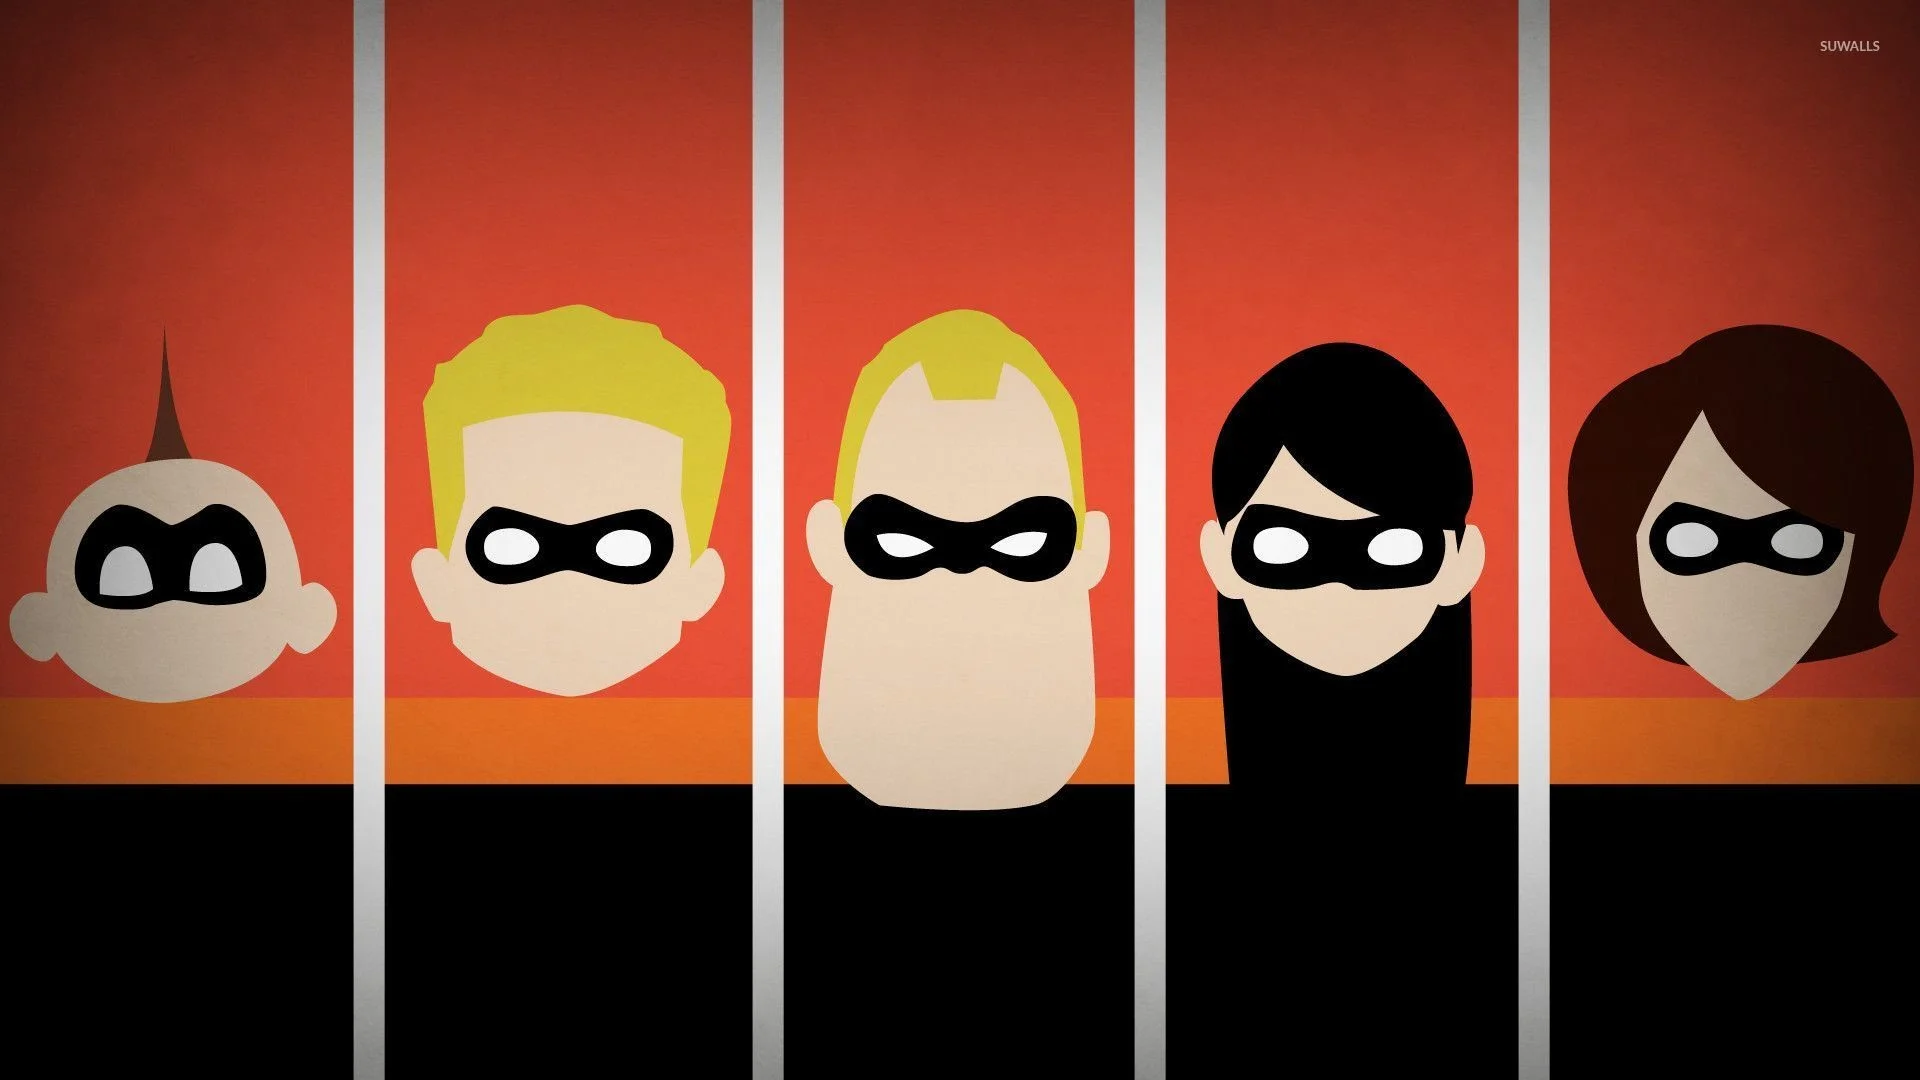 Download The Incredibles Wallpaper Gallery